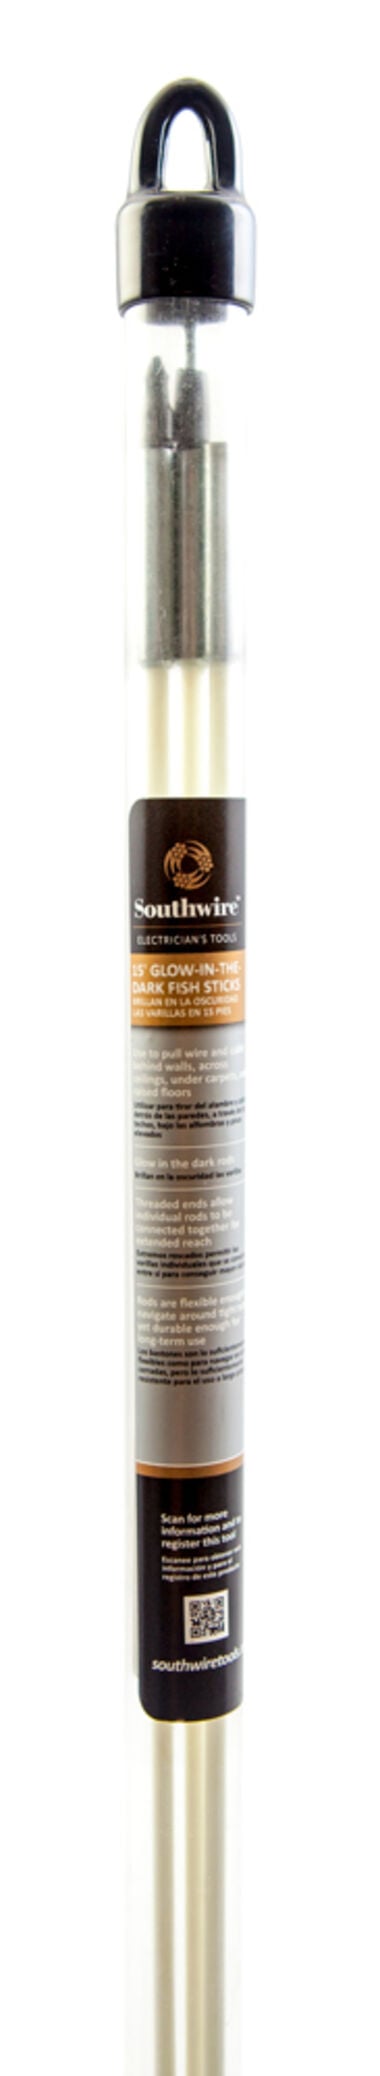 Southwire Fish Stick Glow in Dark 15', large image number 0